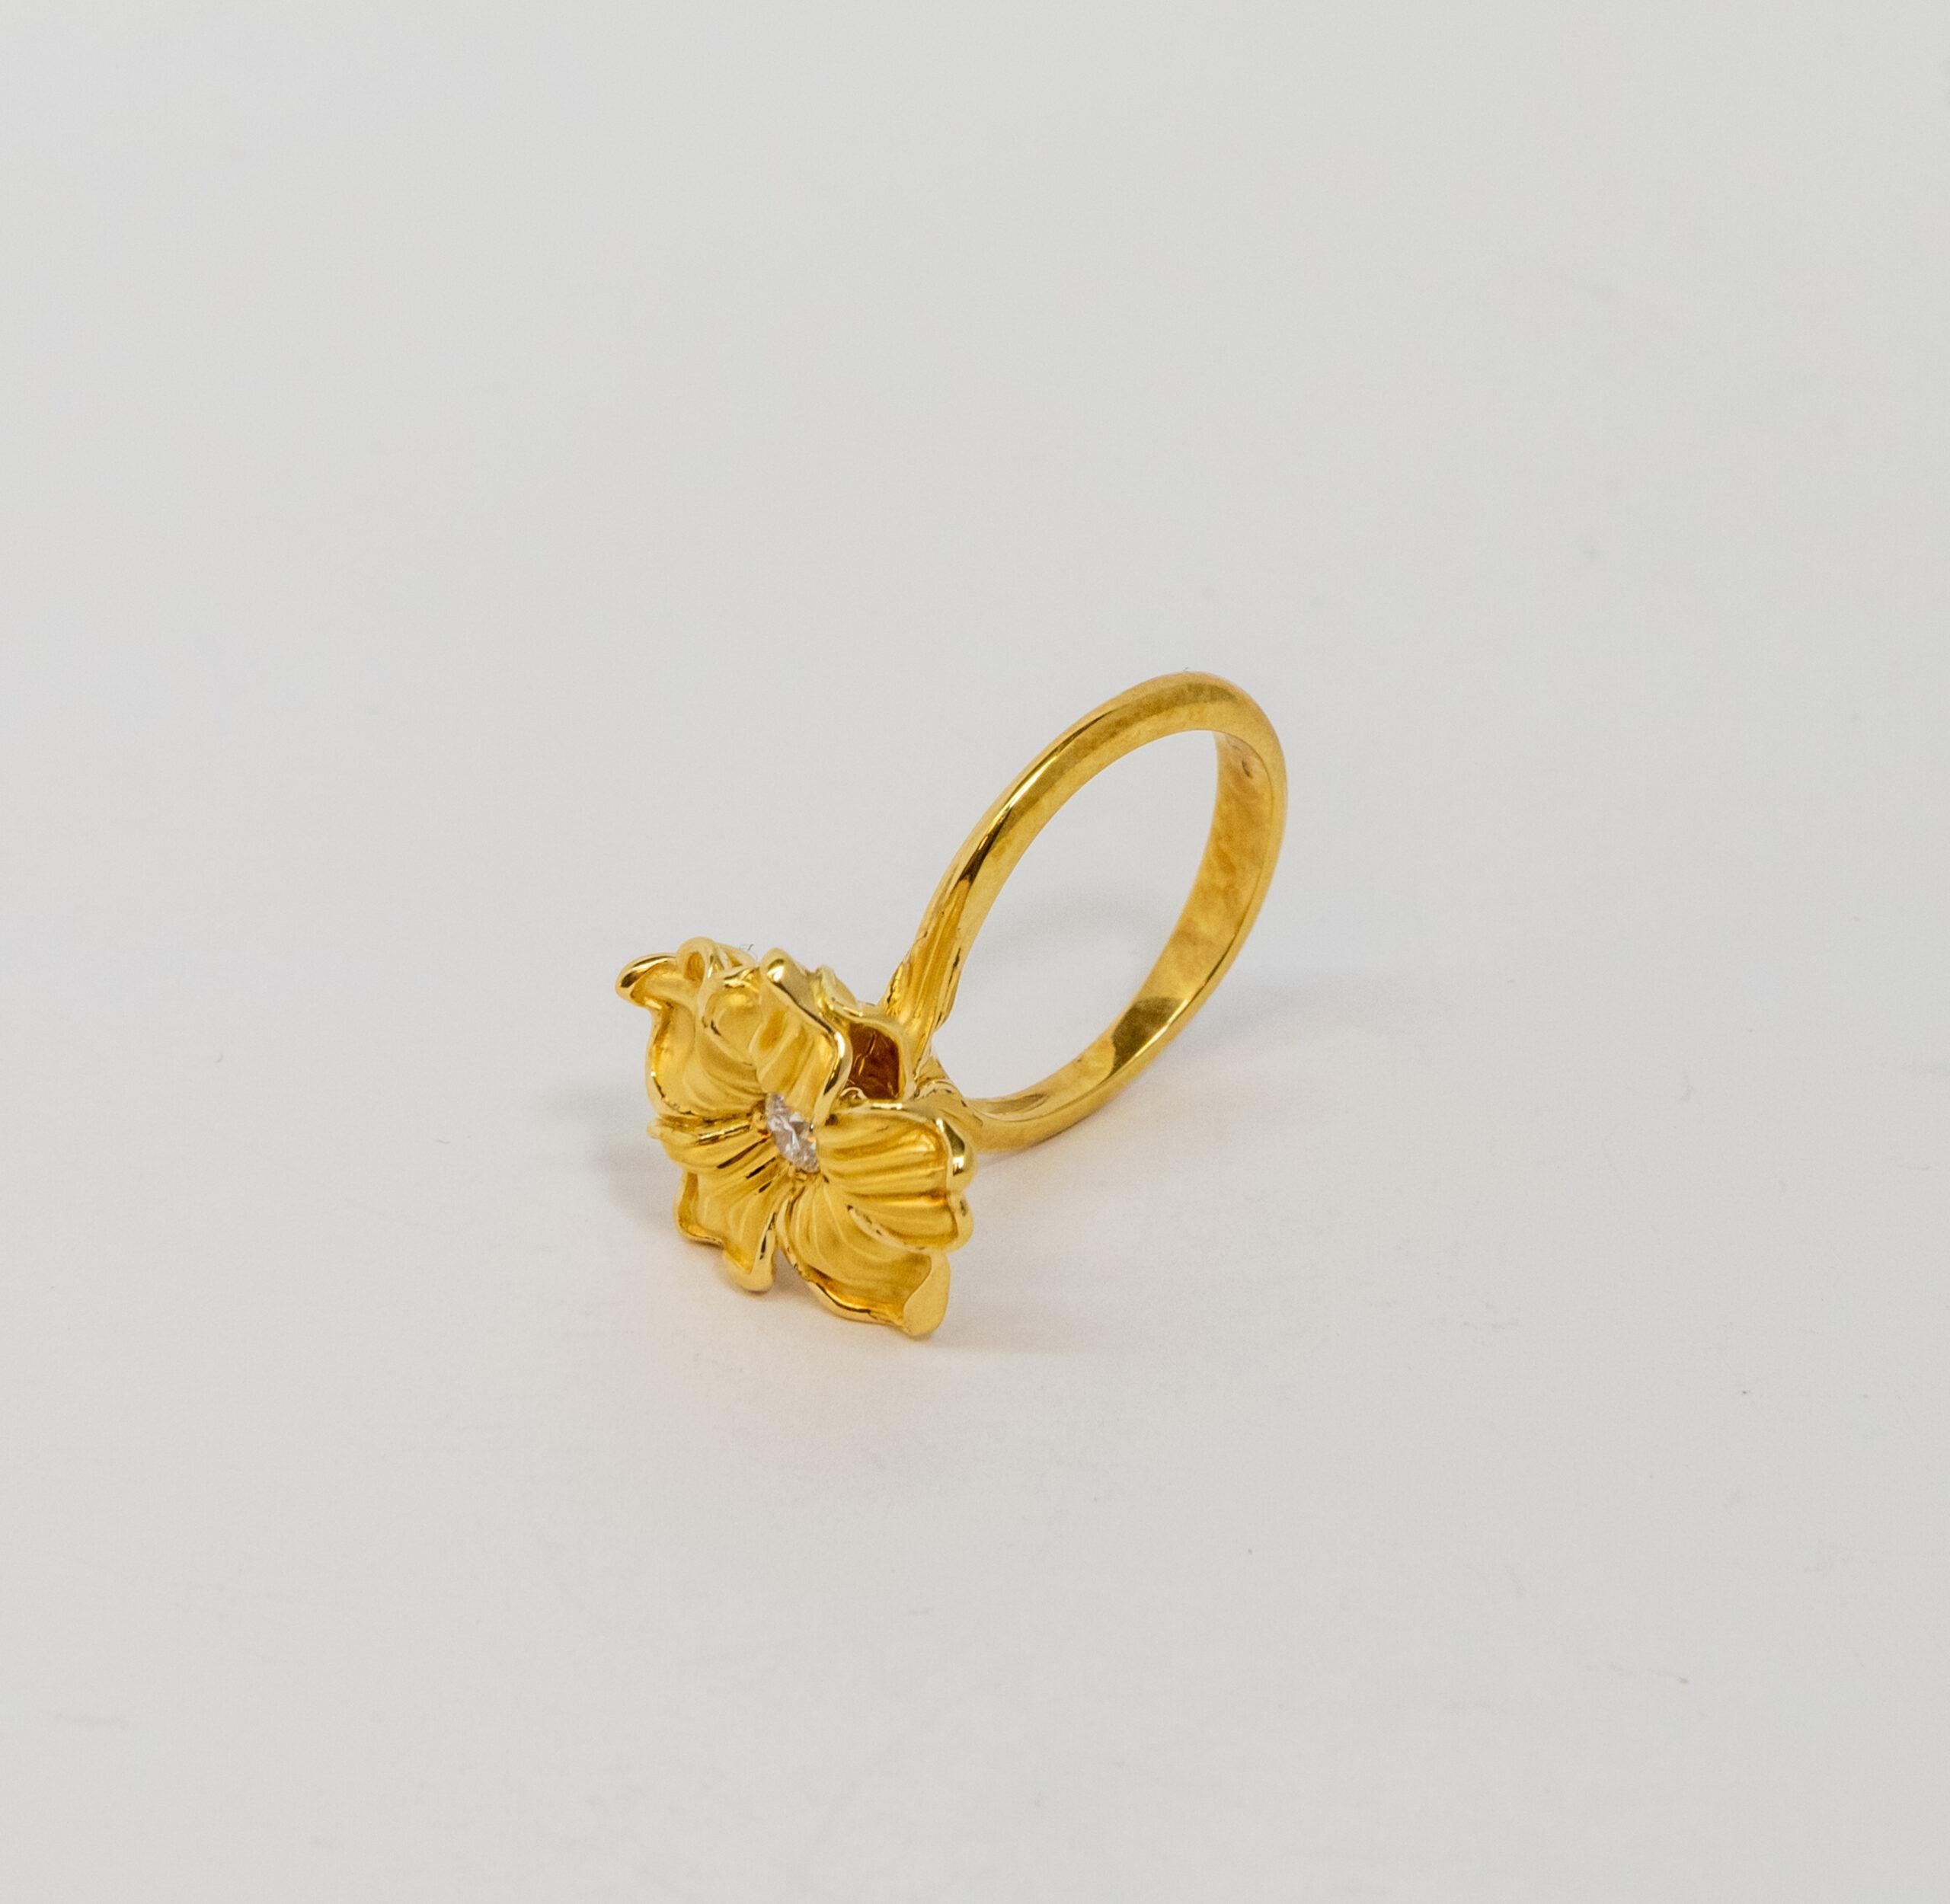 This ring is made of 18K Yellow Gold. It is decorated with 18K Yellow Gold flower with a diamond (~0.19ct)

Size – 56 (7.5 US), 53 (6.5 US)